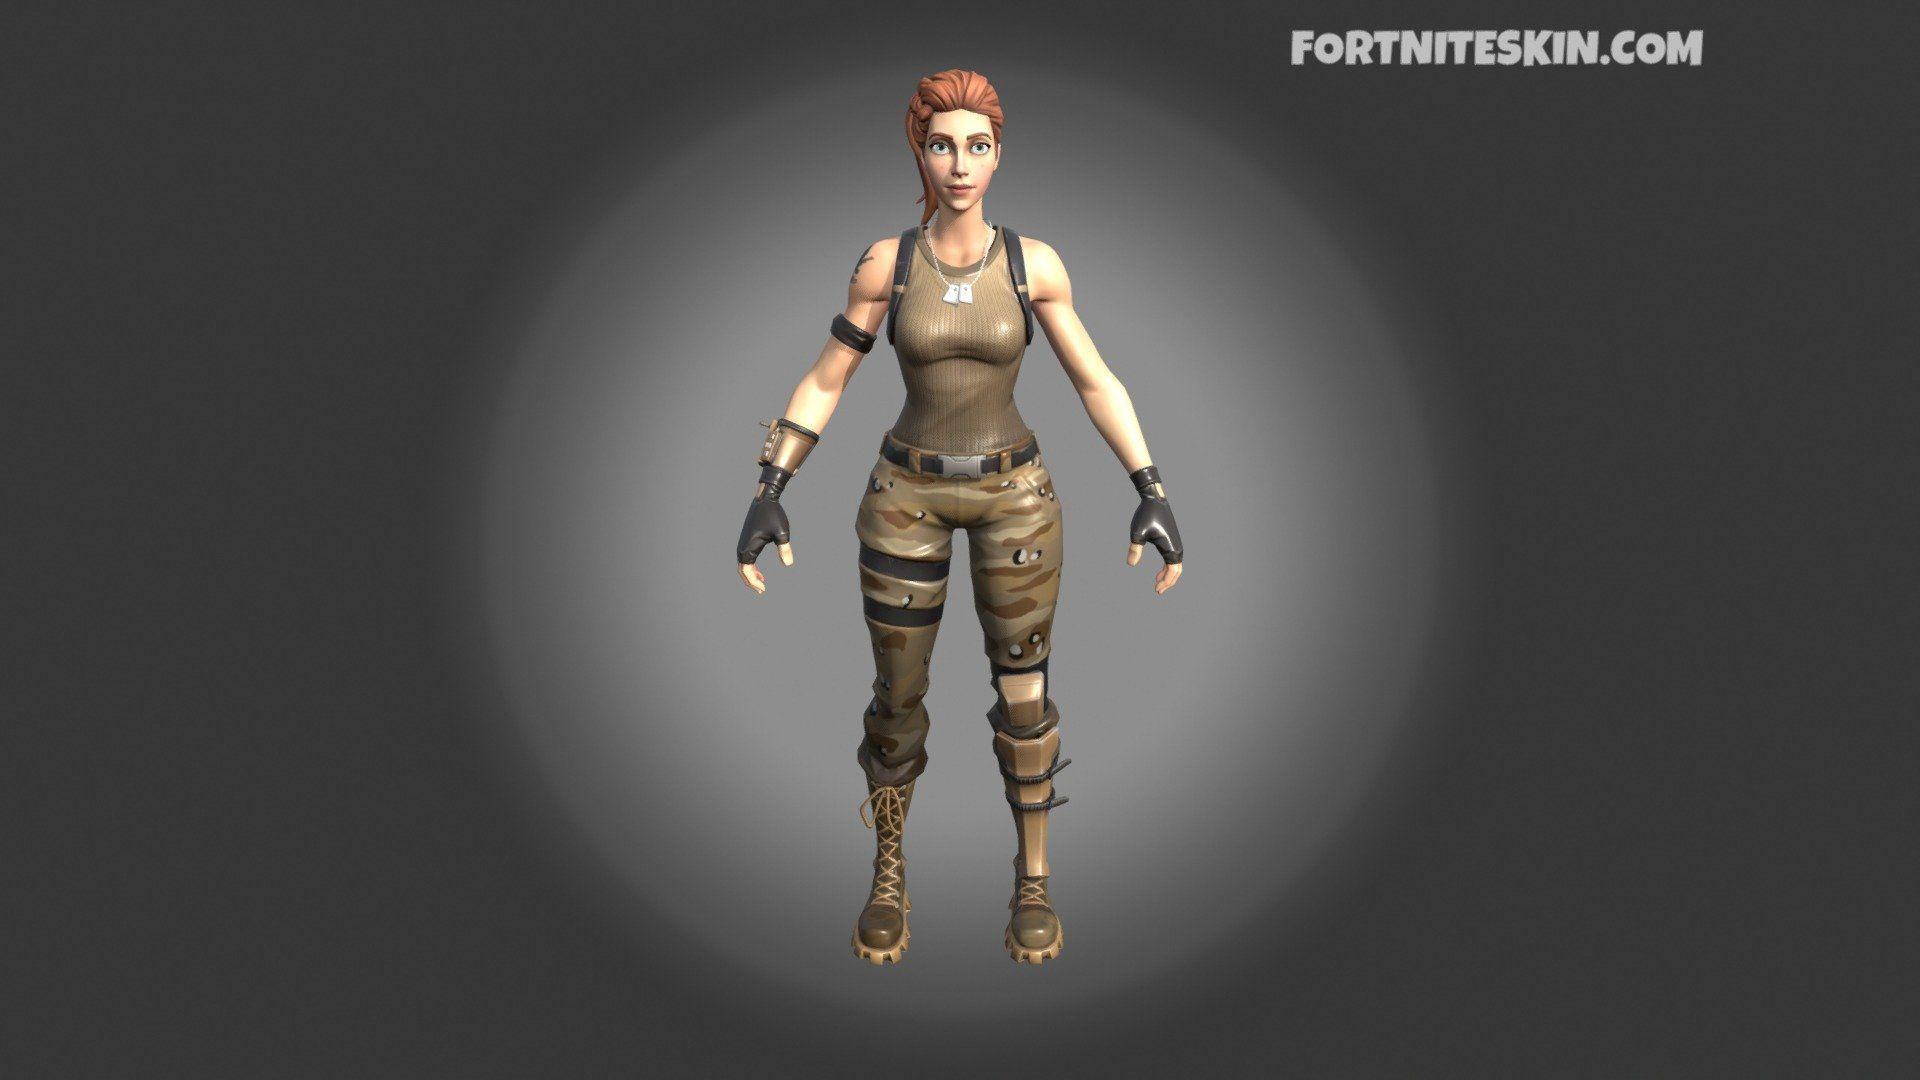 3D Models Tagged Fortnite Tower Recon Specialist